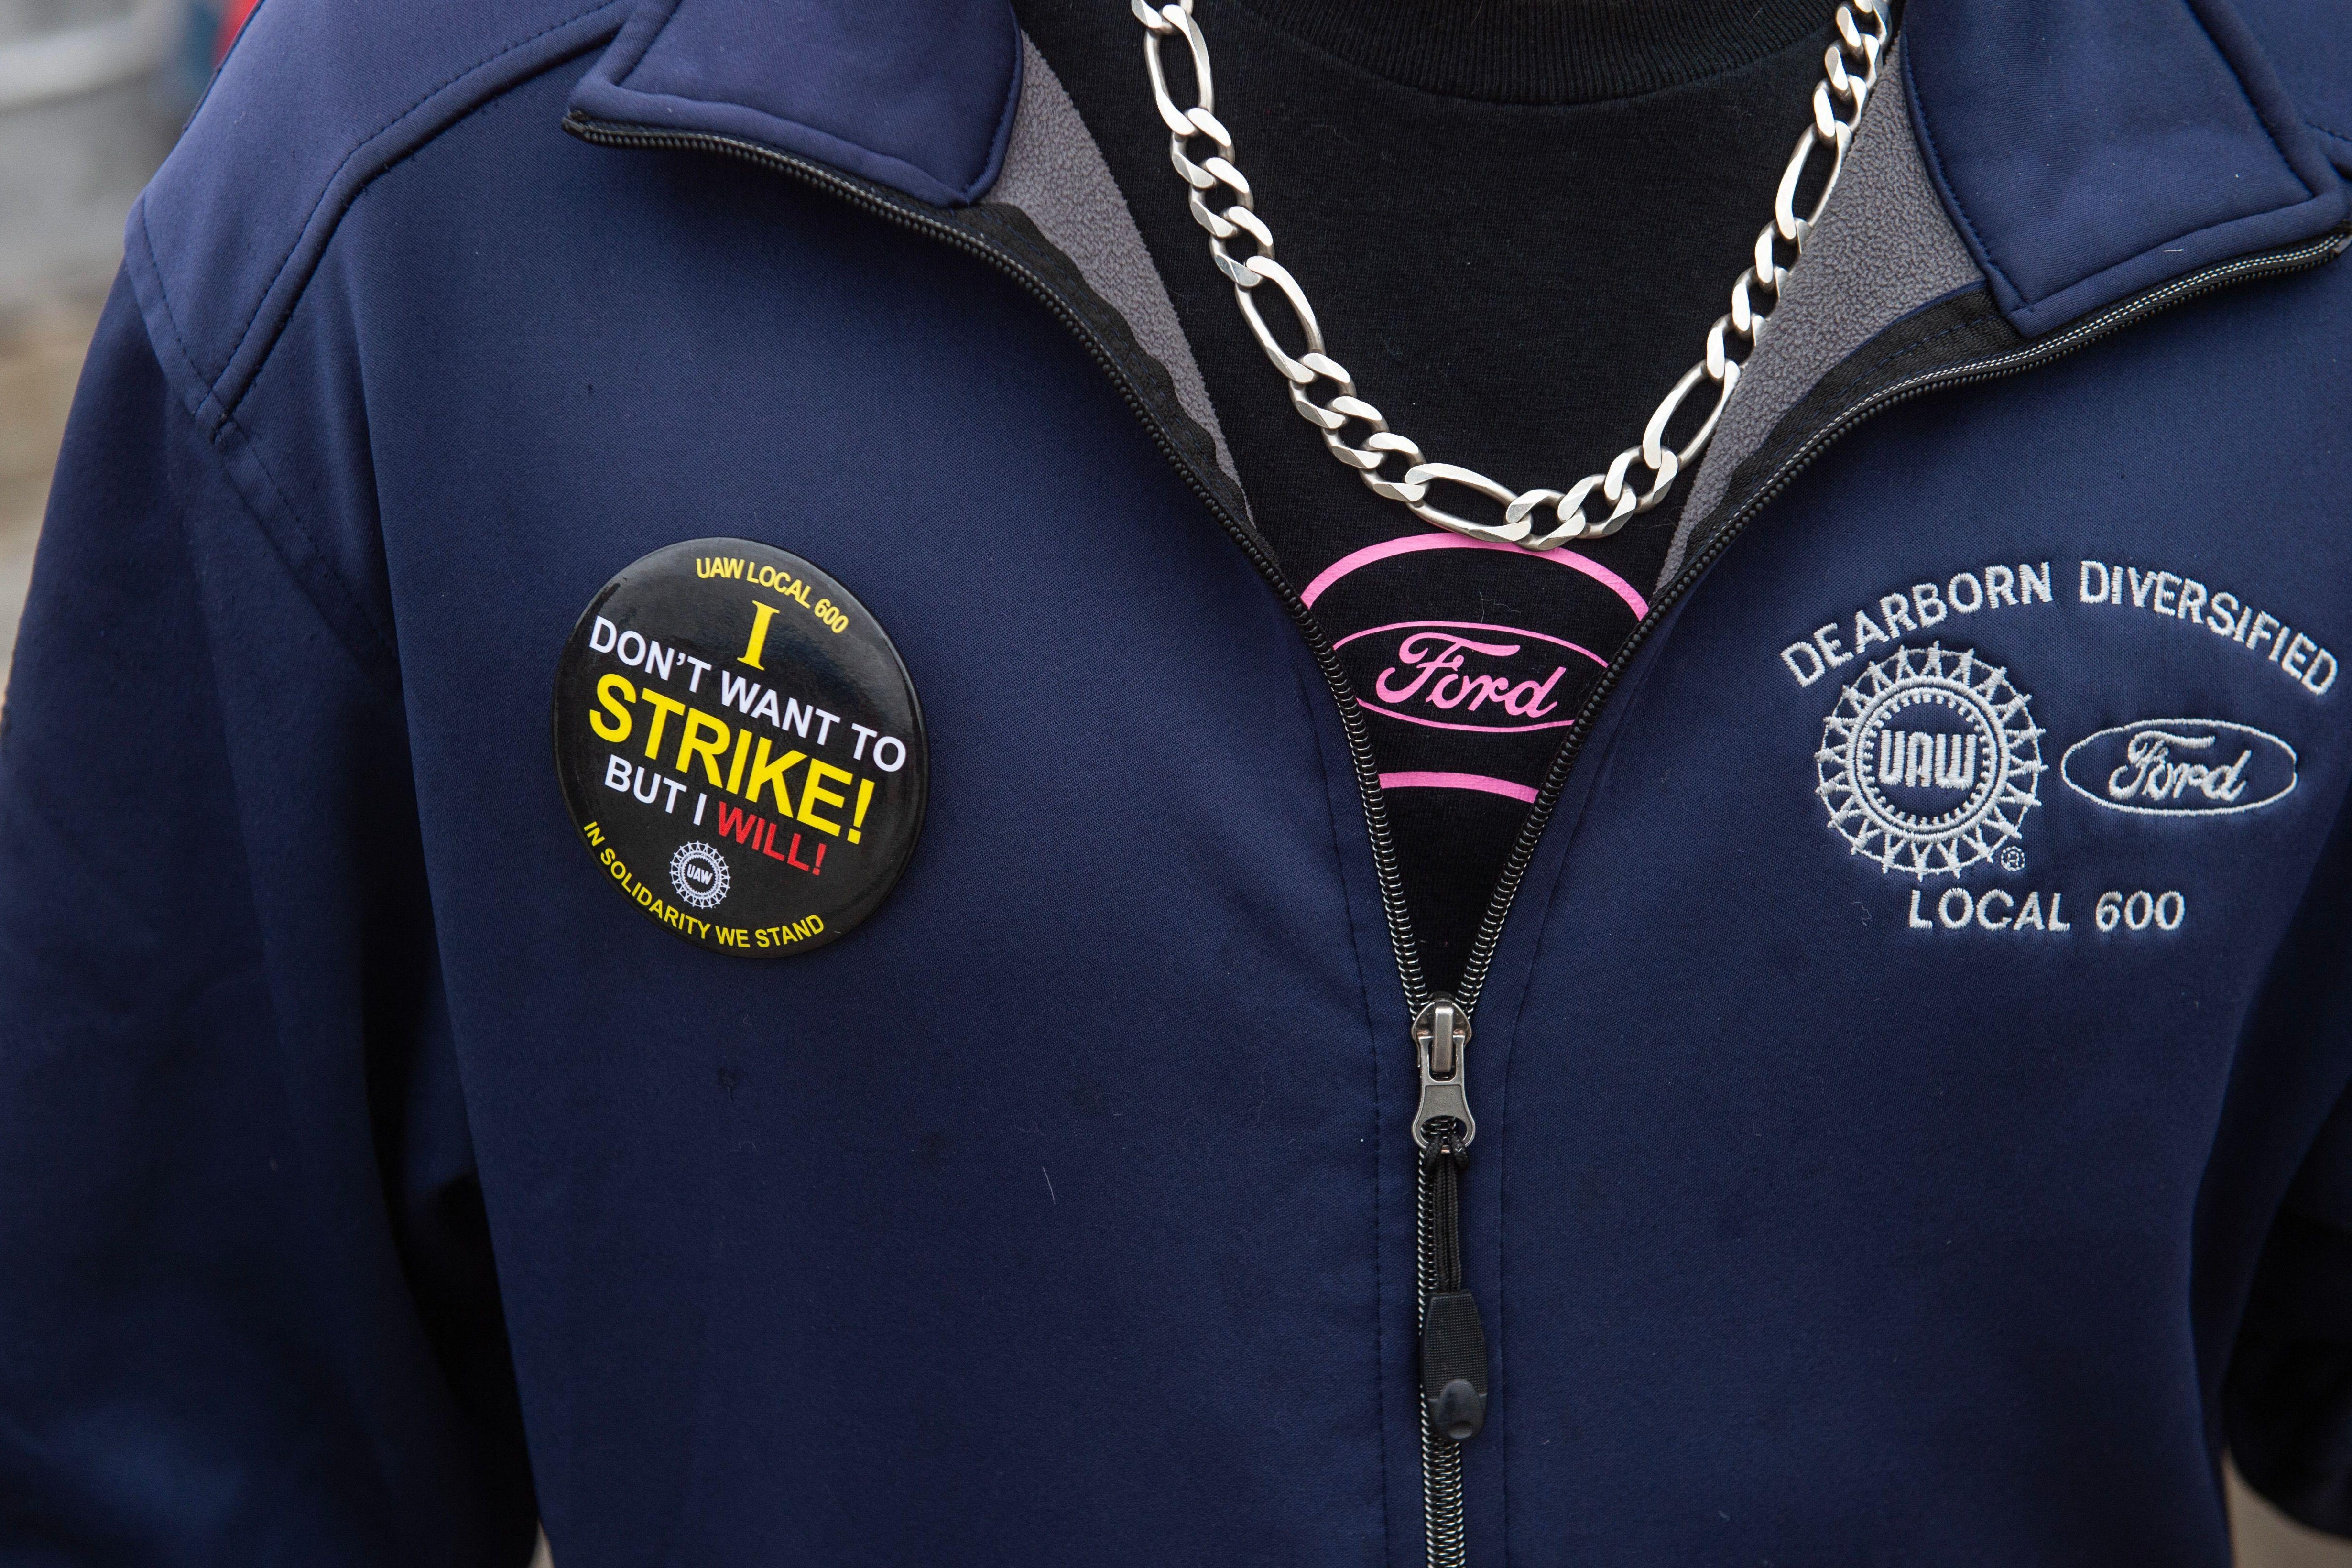 A close-up image of the chest of the worker on the UAW picket line, focused on a pin that reads: "I DON'T WANT TO STRIKE! BUT I WILL!" The person is wearing a silver chain necklace, and a front-zipped blue sweatshirt with emblems that read: "DEARBORN DIVERSIFIED, UAW, FORD, LOCAL 600." A black T-shirt with a pink Ford logo can be seen peeking out underneath.